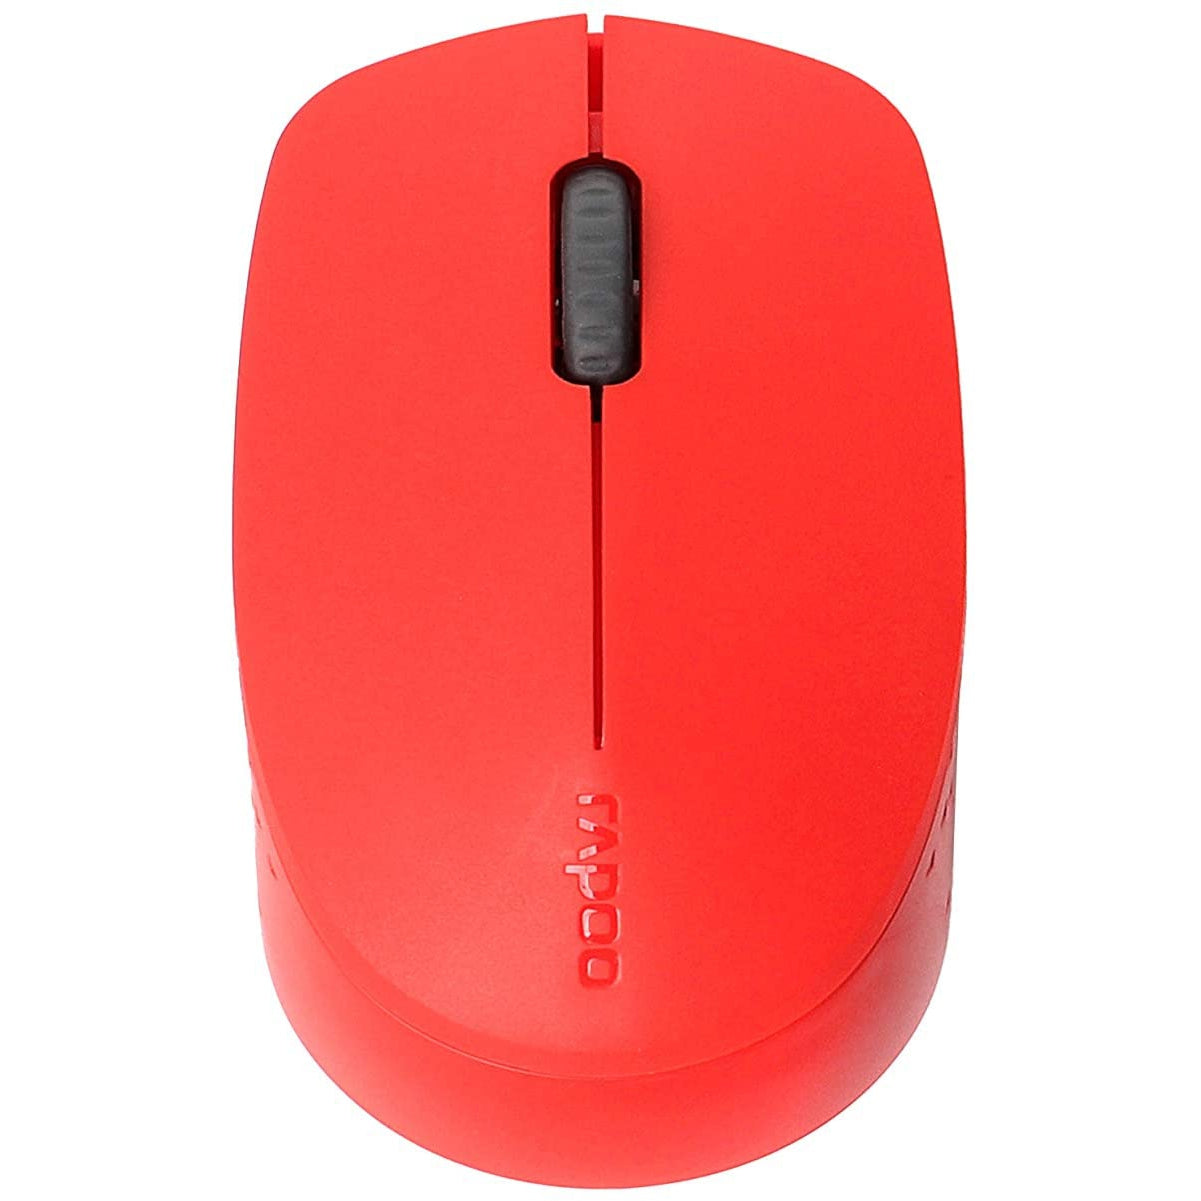 Rapoo M100 Multi-mode Wireless Silent Optical Mouse - Red - Refurbished Good